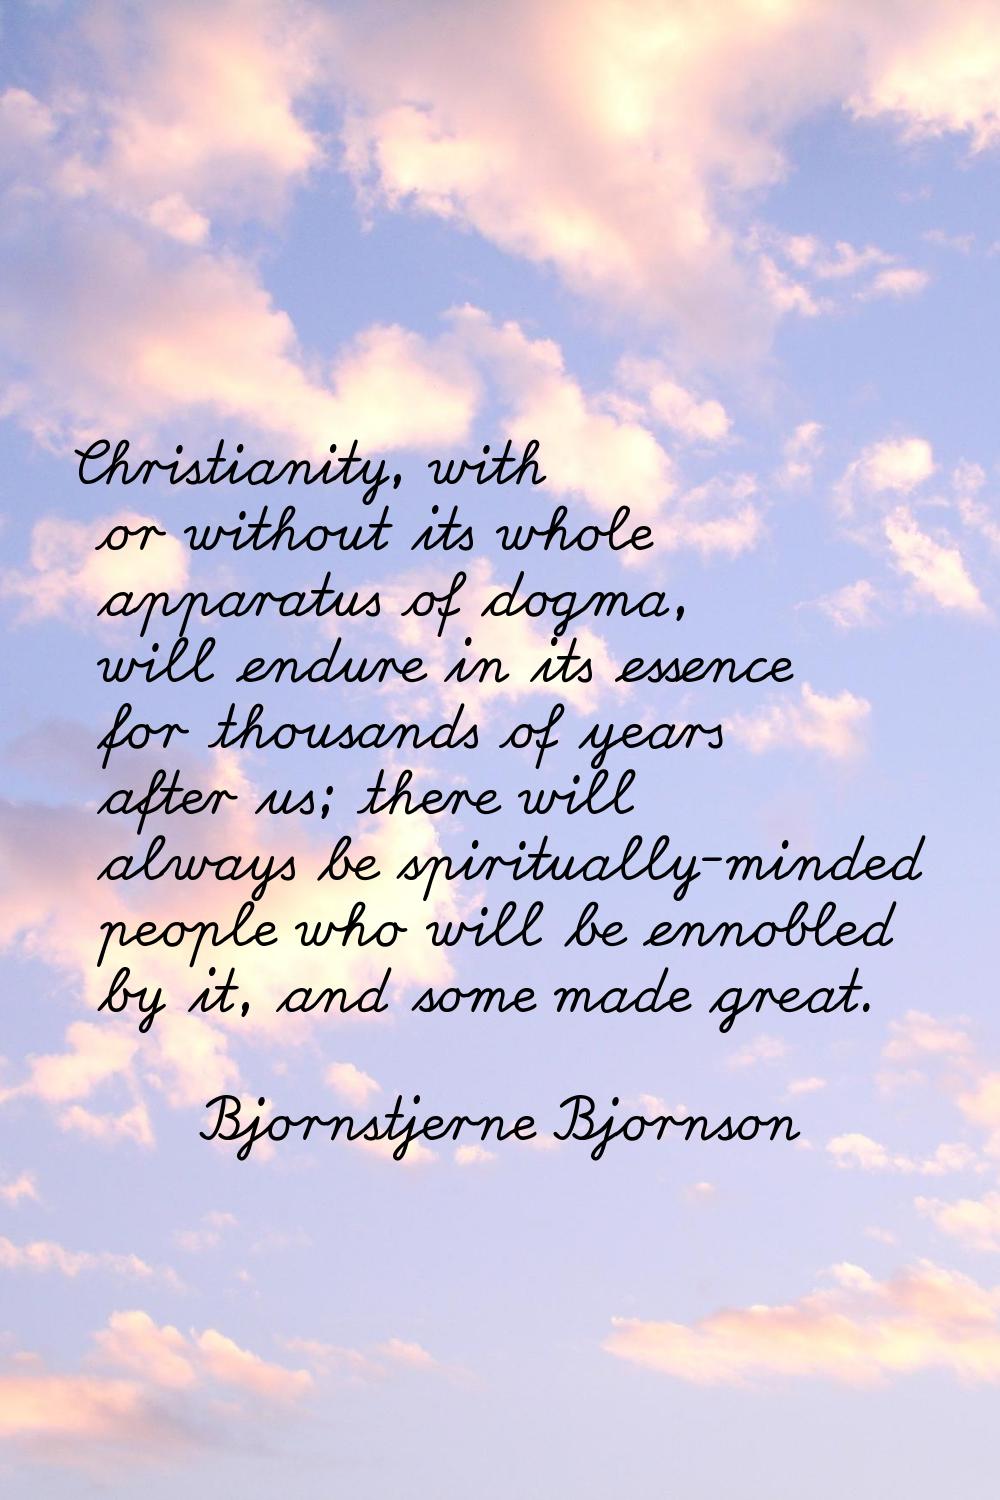 Christianity, with or without its whole apparatus of dogma, will endure in its essence for thousand